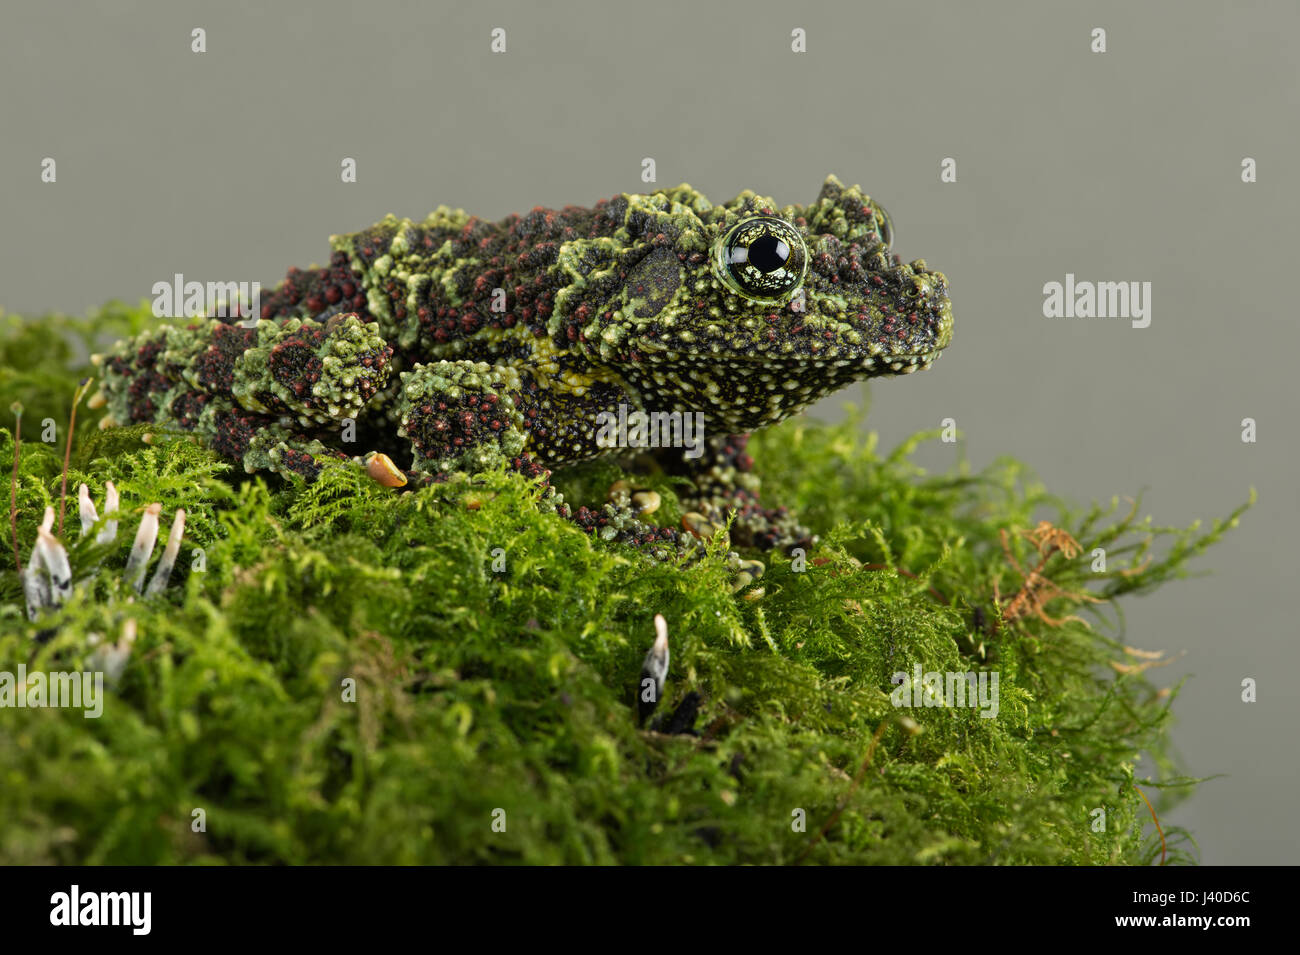 Vietnamese Mossy Frog (Theloderma corticale) Stock Photo